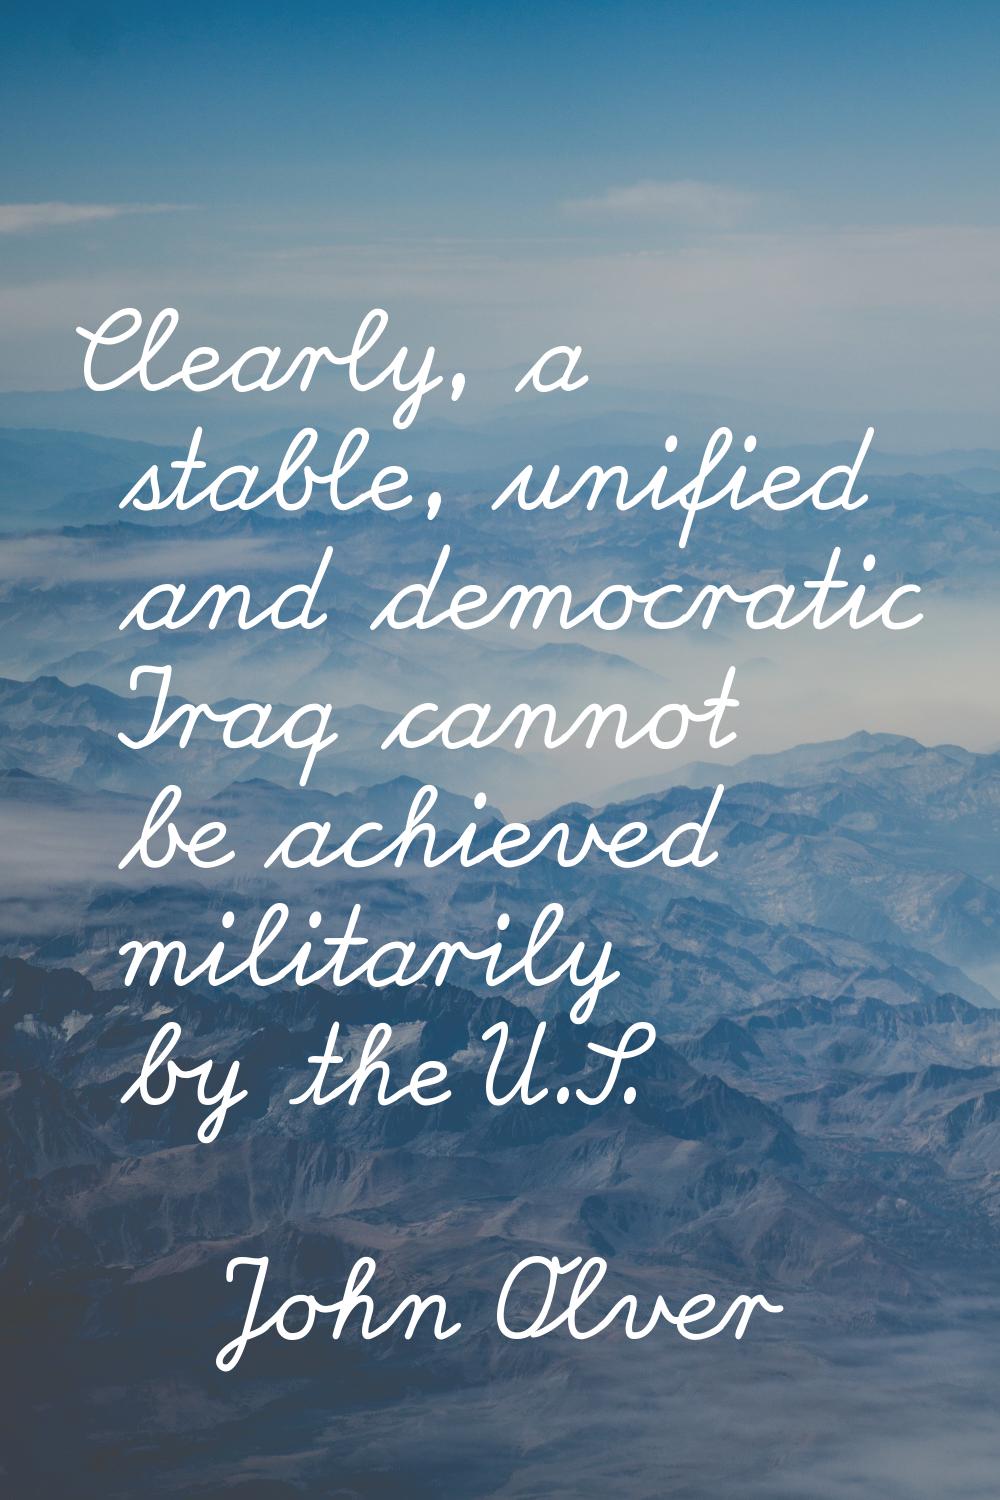 Clearly, a stable, unified and democratic Iraq cannot be achieved militarily by the U.S.